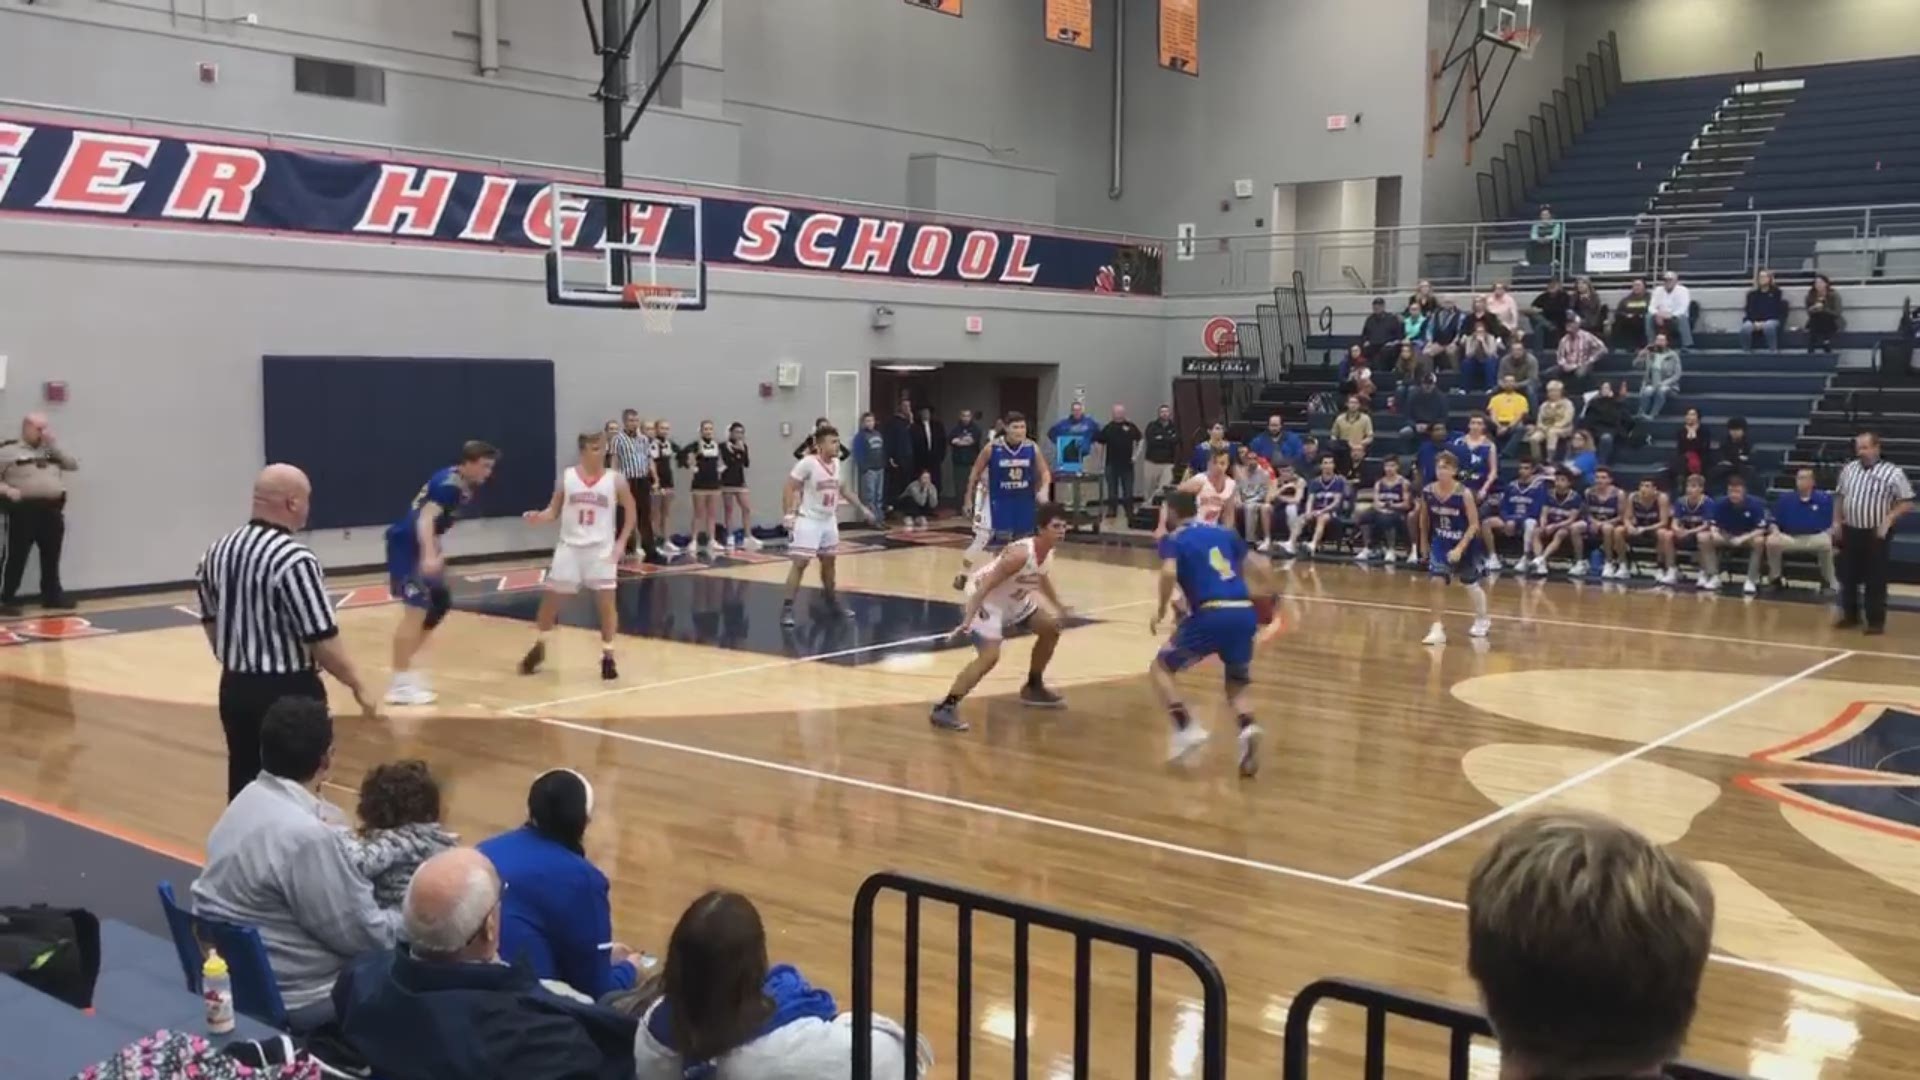 Grizzlies sophomore Brody Grubb took the inbound pass with seconds remaining and hurled it at the goal from the opposite end of the court... and hit it! Video courtesy: Anthony Atkins, Lakeway Automotive